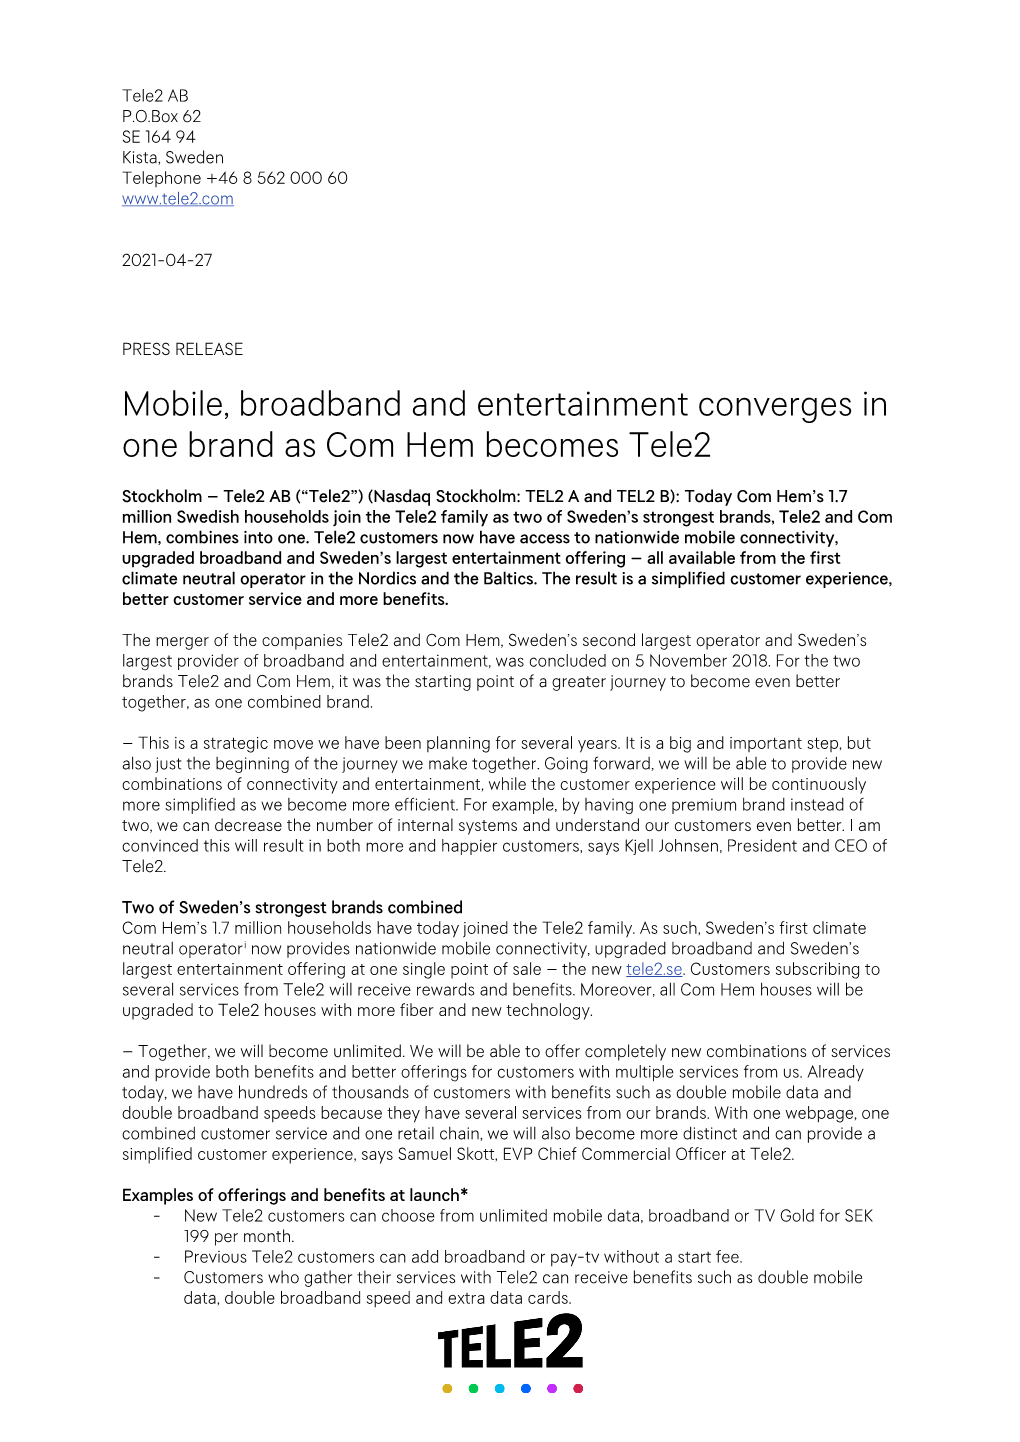 Mobile, Broadband and Entertainment Converges in One Brand As Com Hem Becomes Tele2